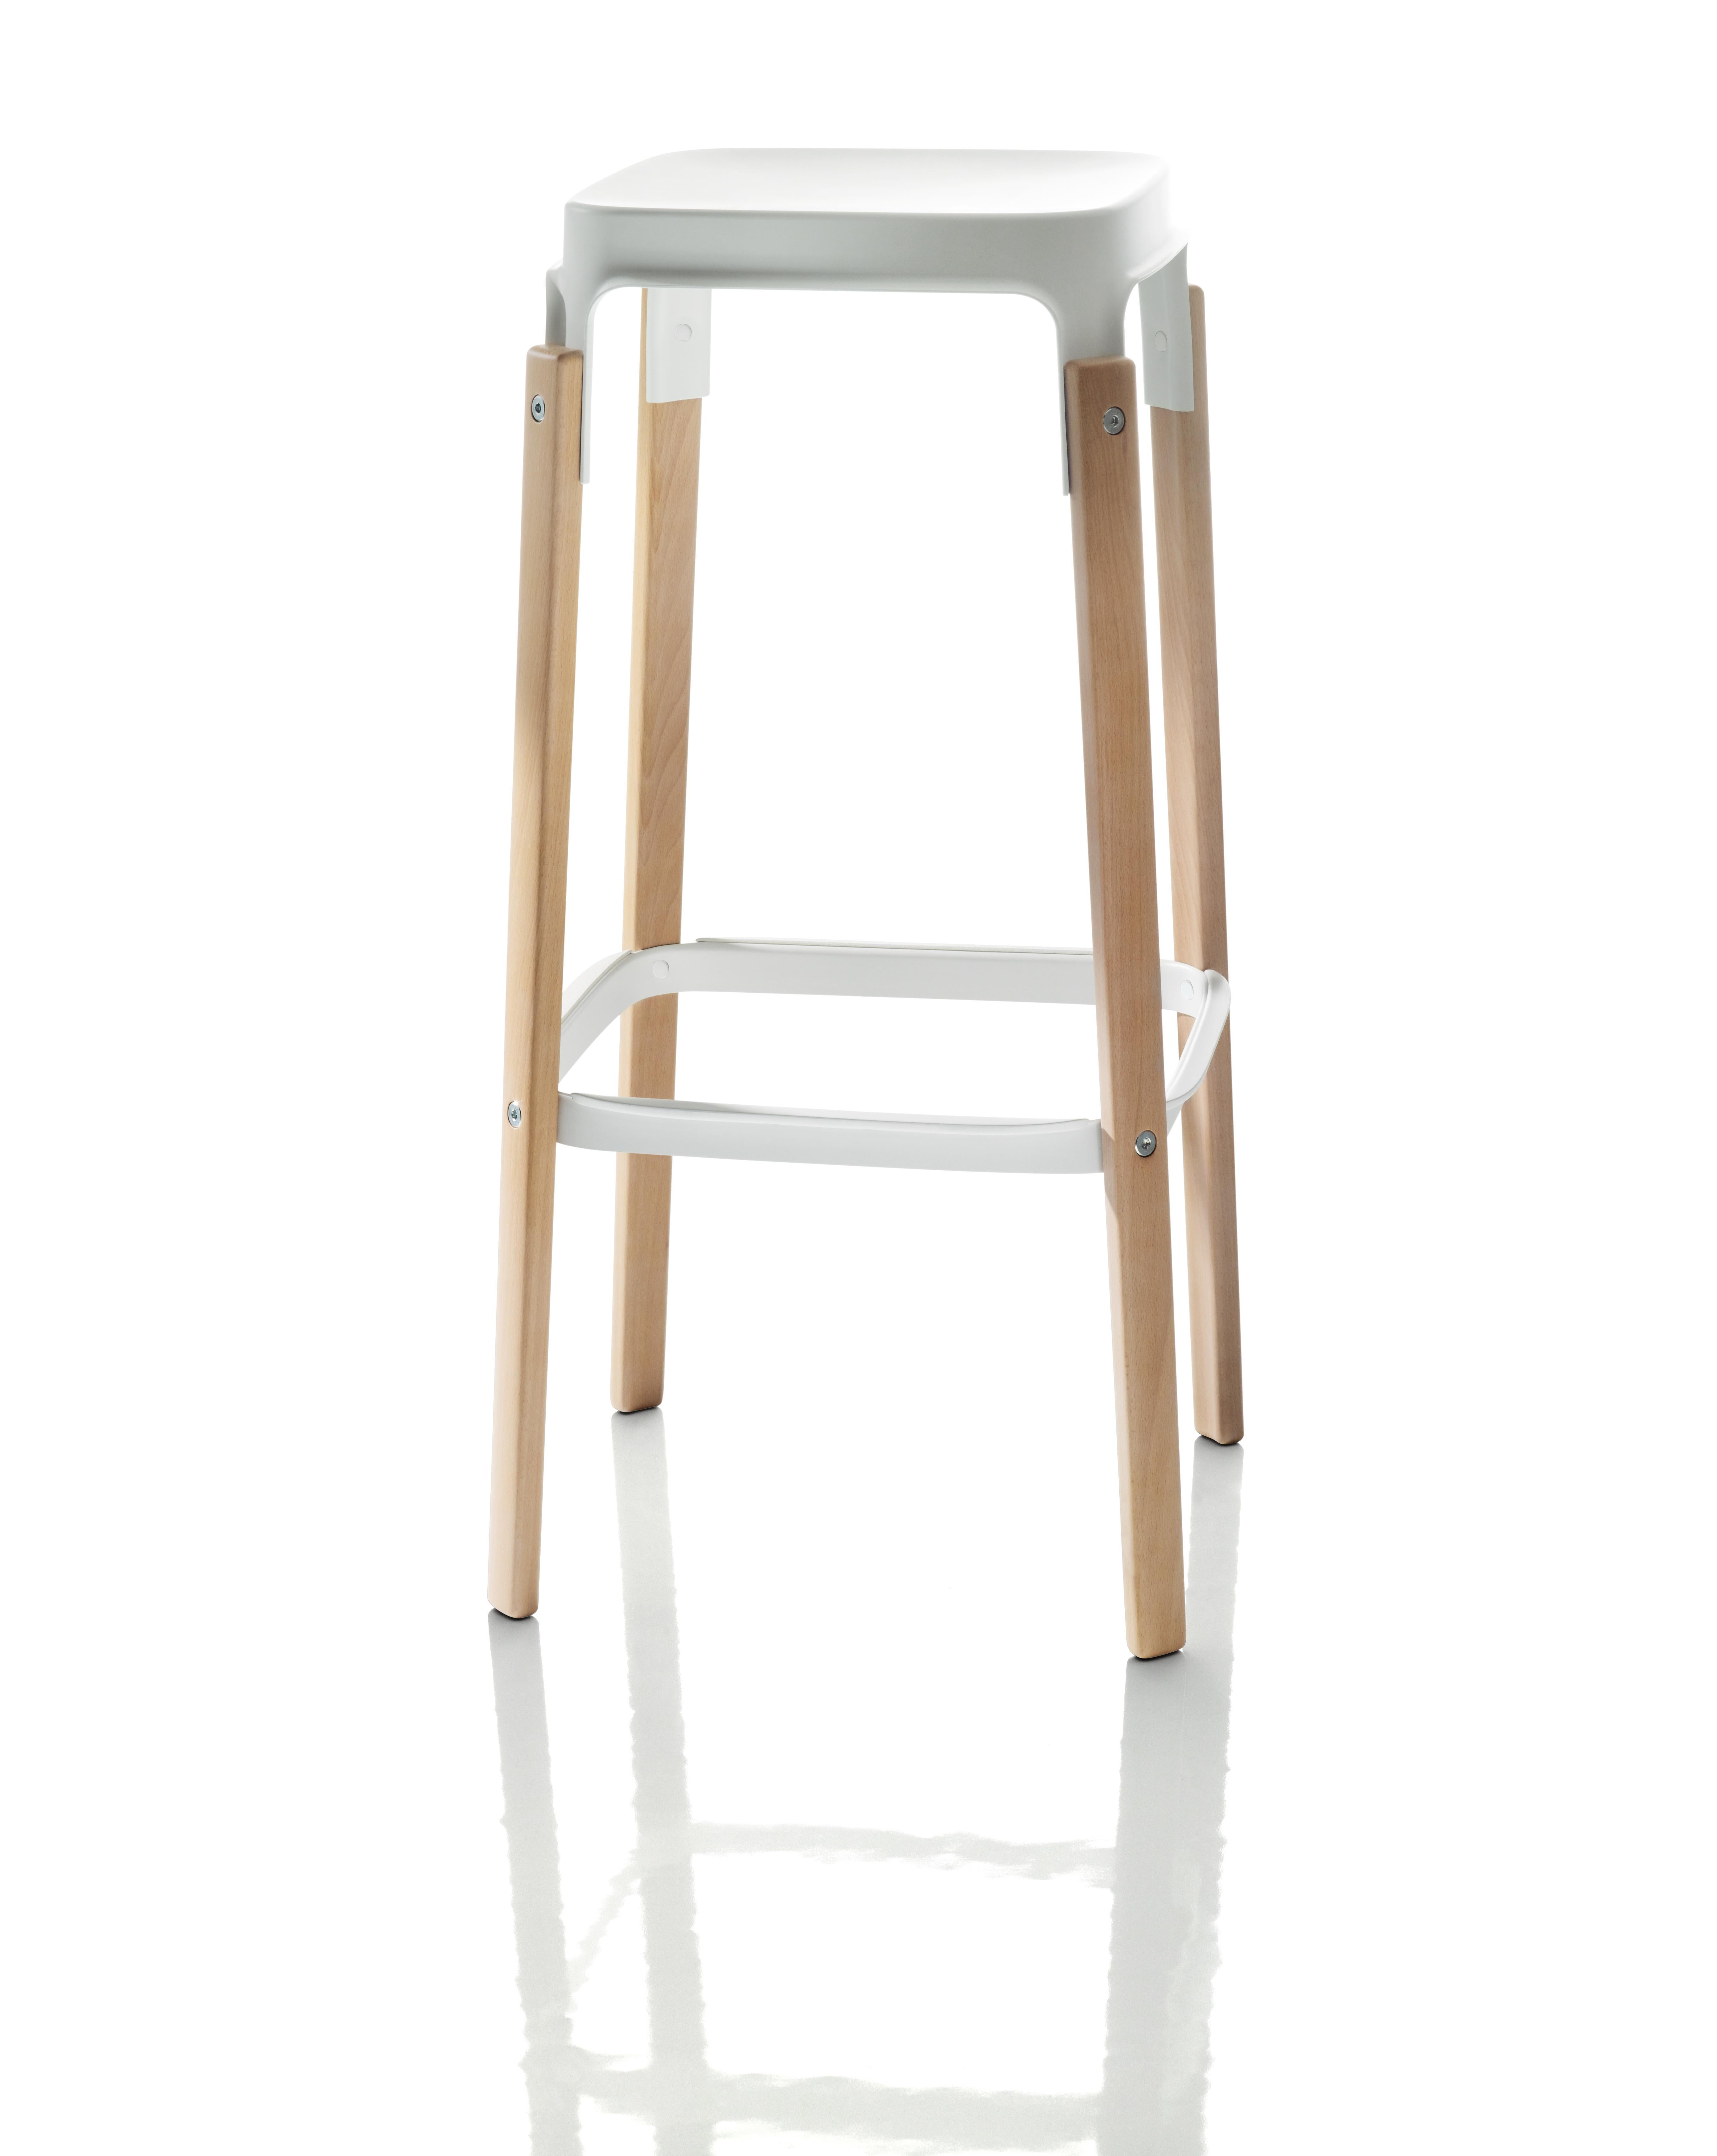 Steelwood Stool in Natural/White by Ronan & Erwan Boroullec for MAGIS In New Condition For Sale In Brooklyn, NY